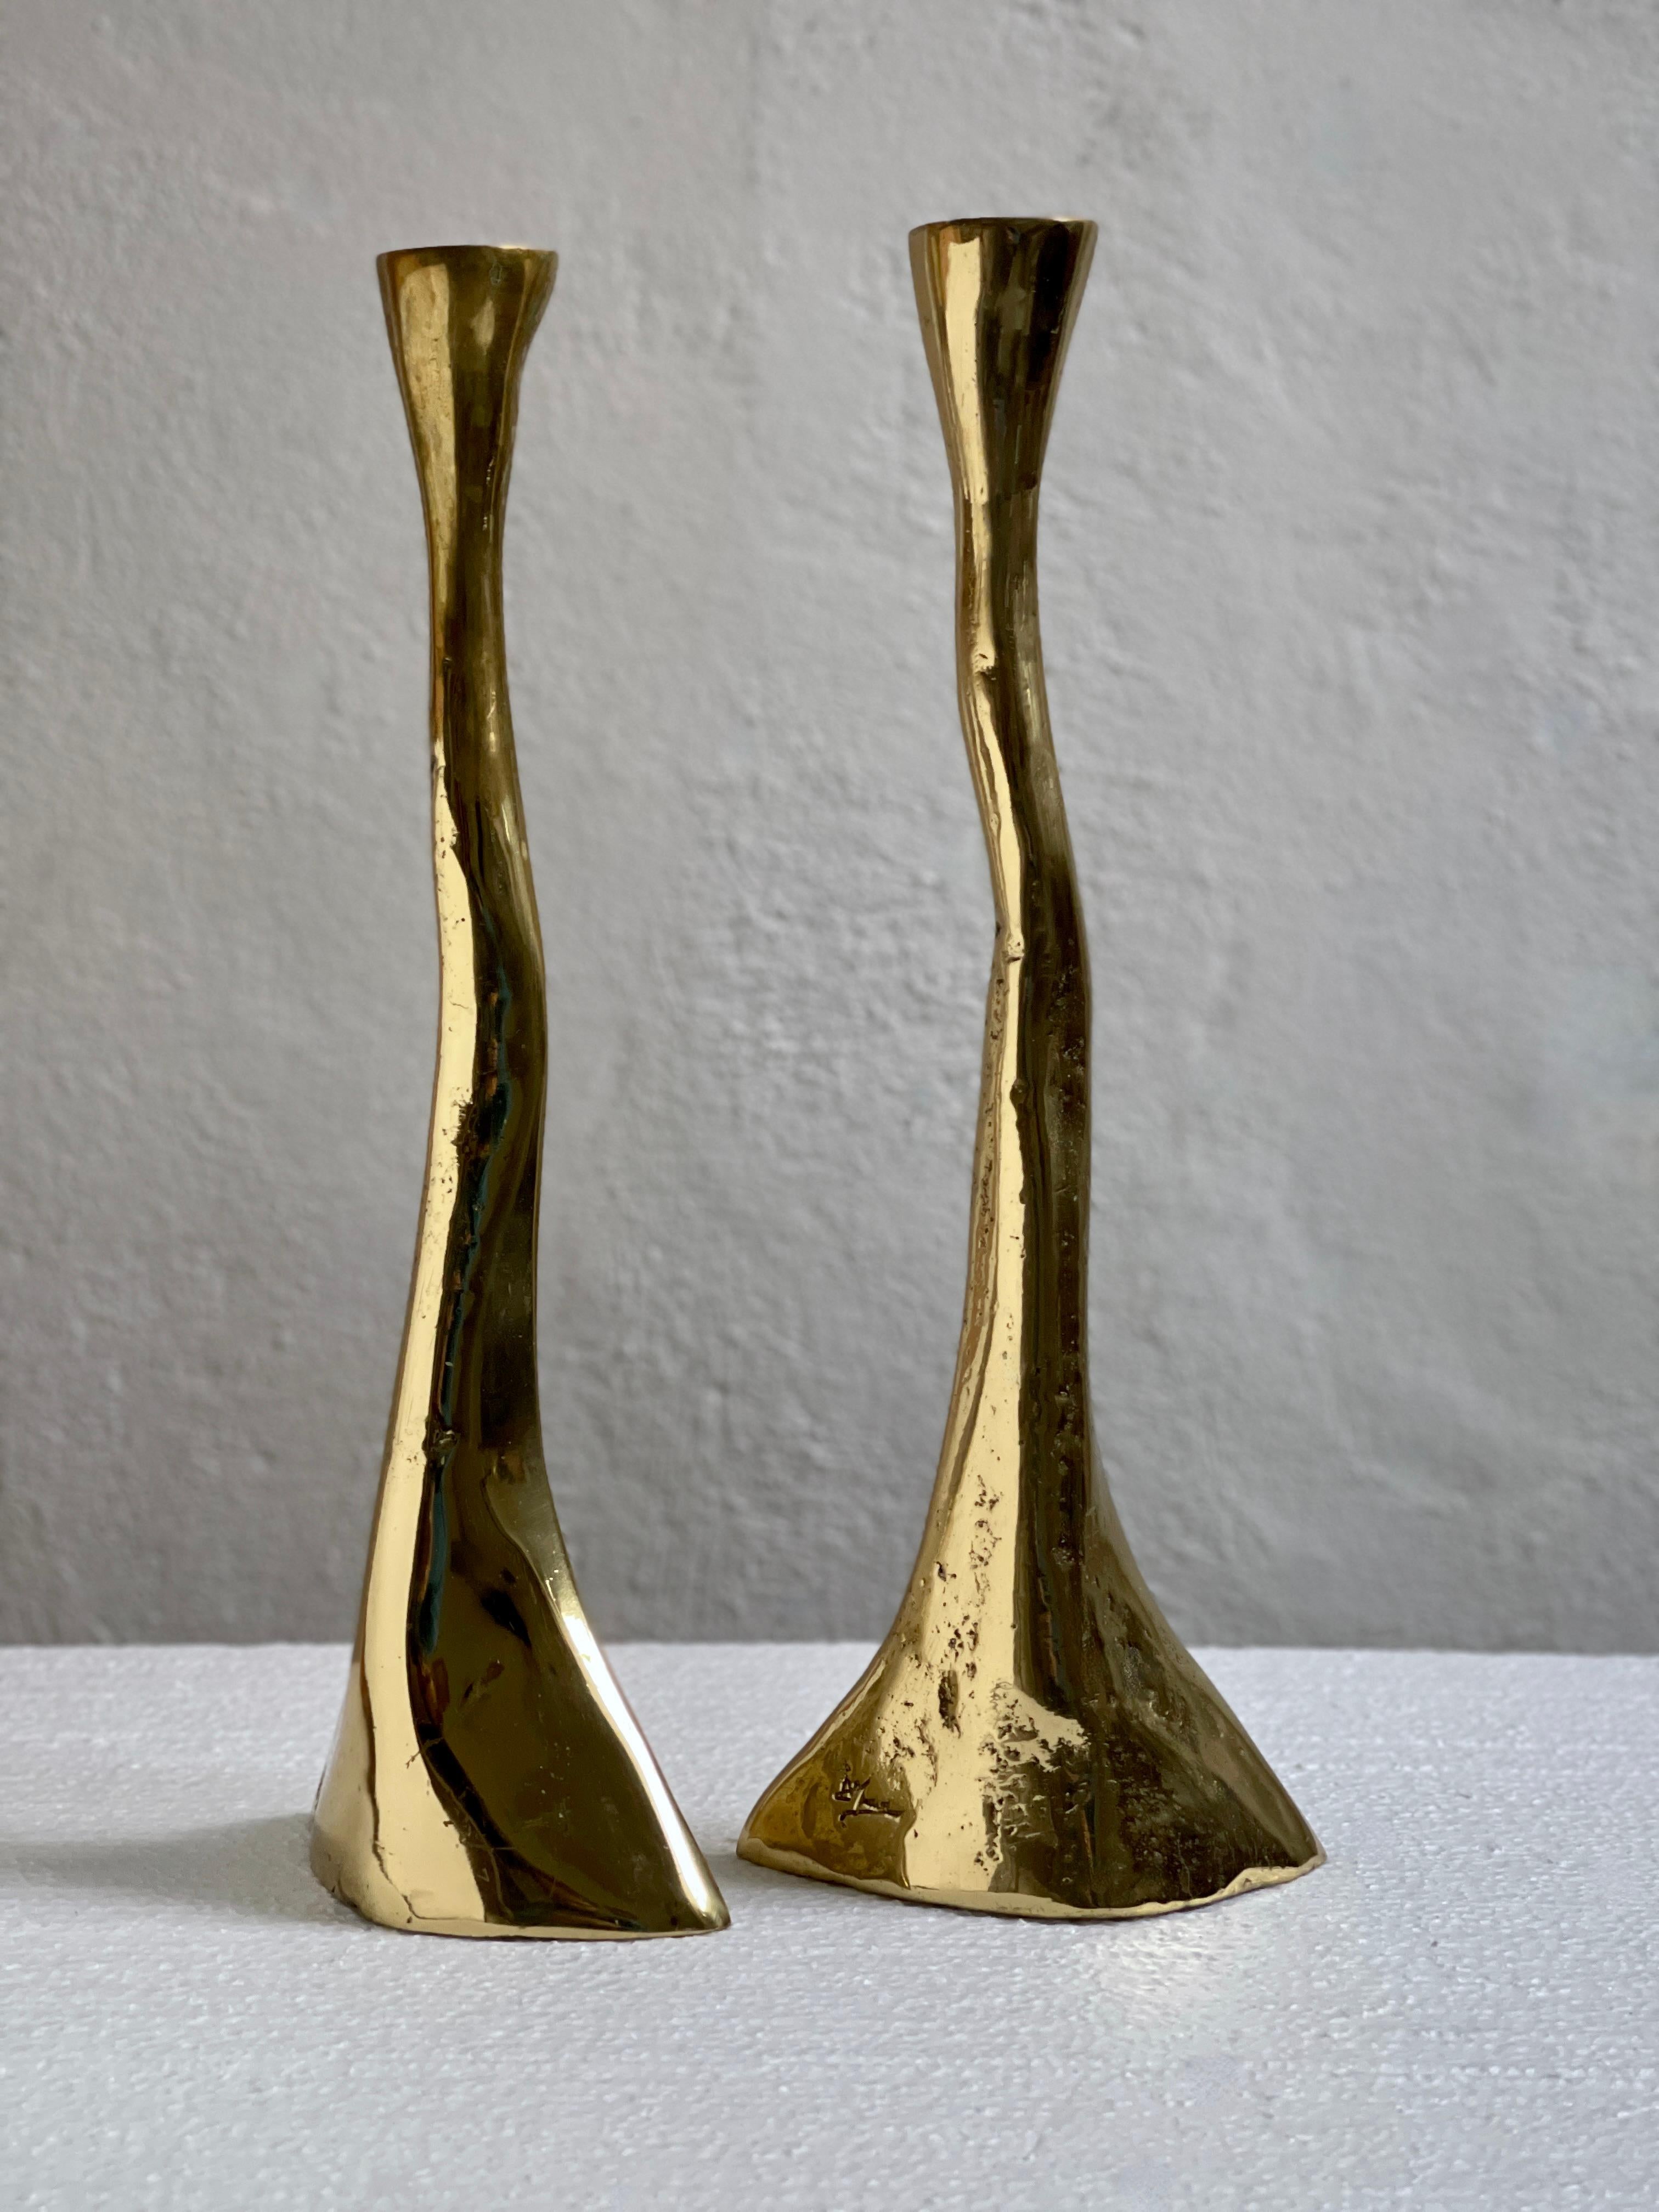 A rare pair of solid and heavy brass candlesticks from mid-20th century Denmark is a captivating testament to the fusion of craftsmanship and design inherent in the era's decorative arts.

The rustic  casting technique employed in their creation